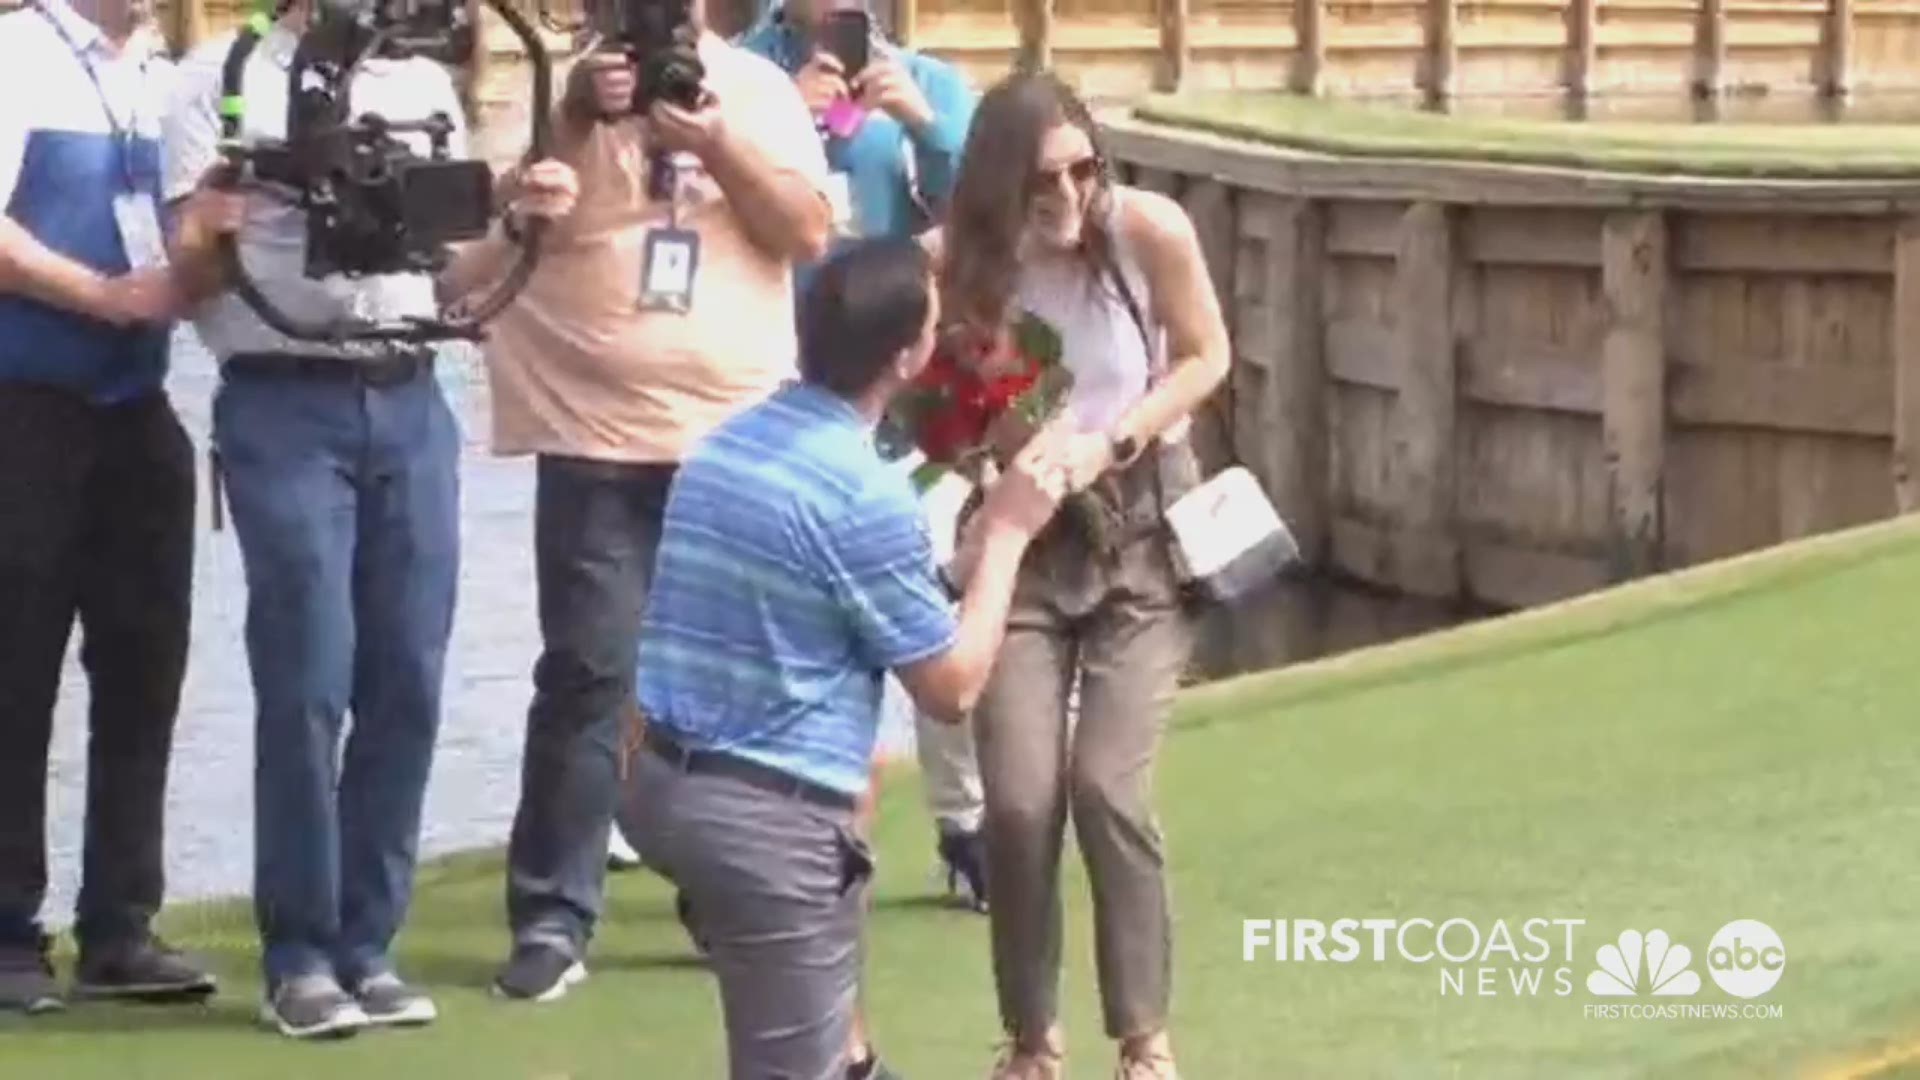 Which one makes you more nervous? 
Hitting a shot on the island green 17th hole at The Players or proposing to your girlfriend at The Players?